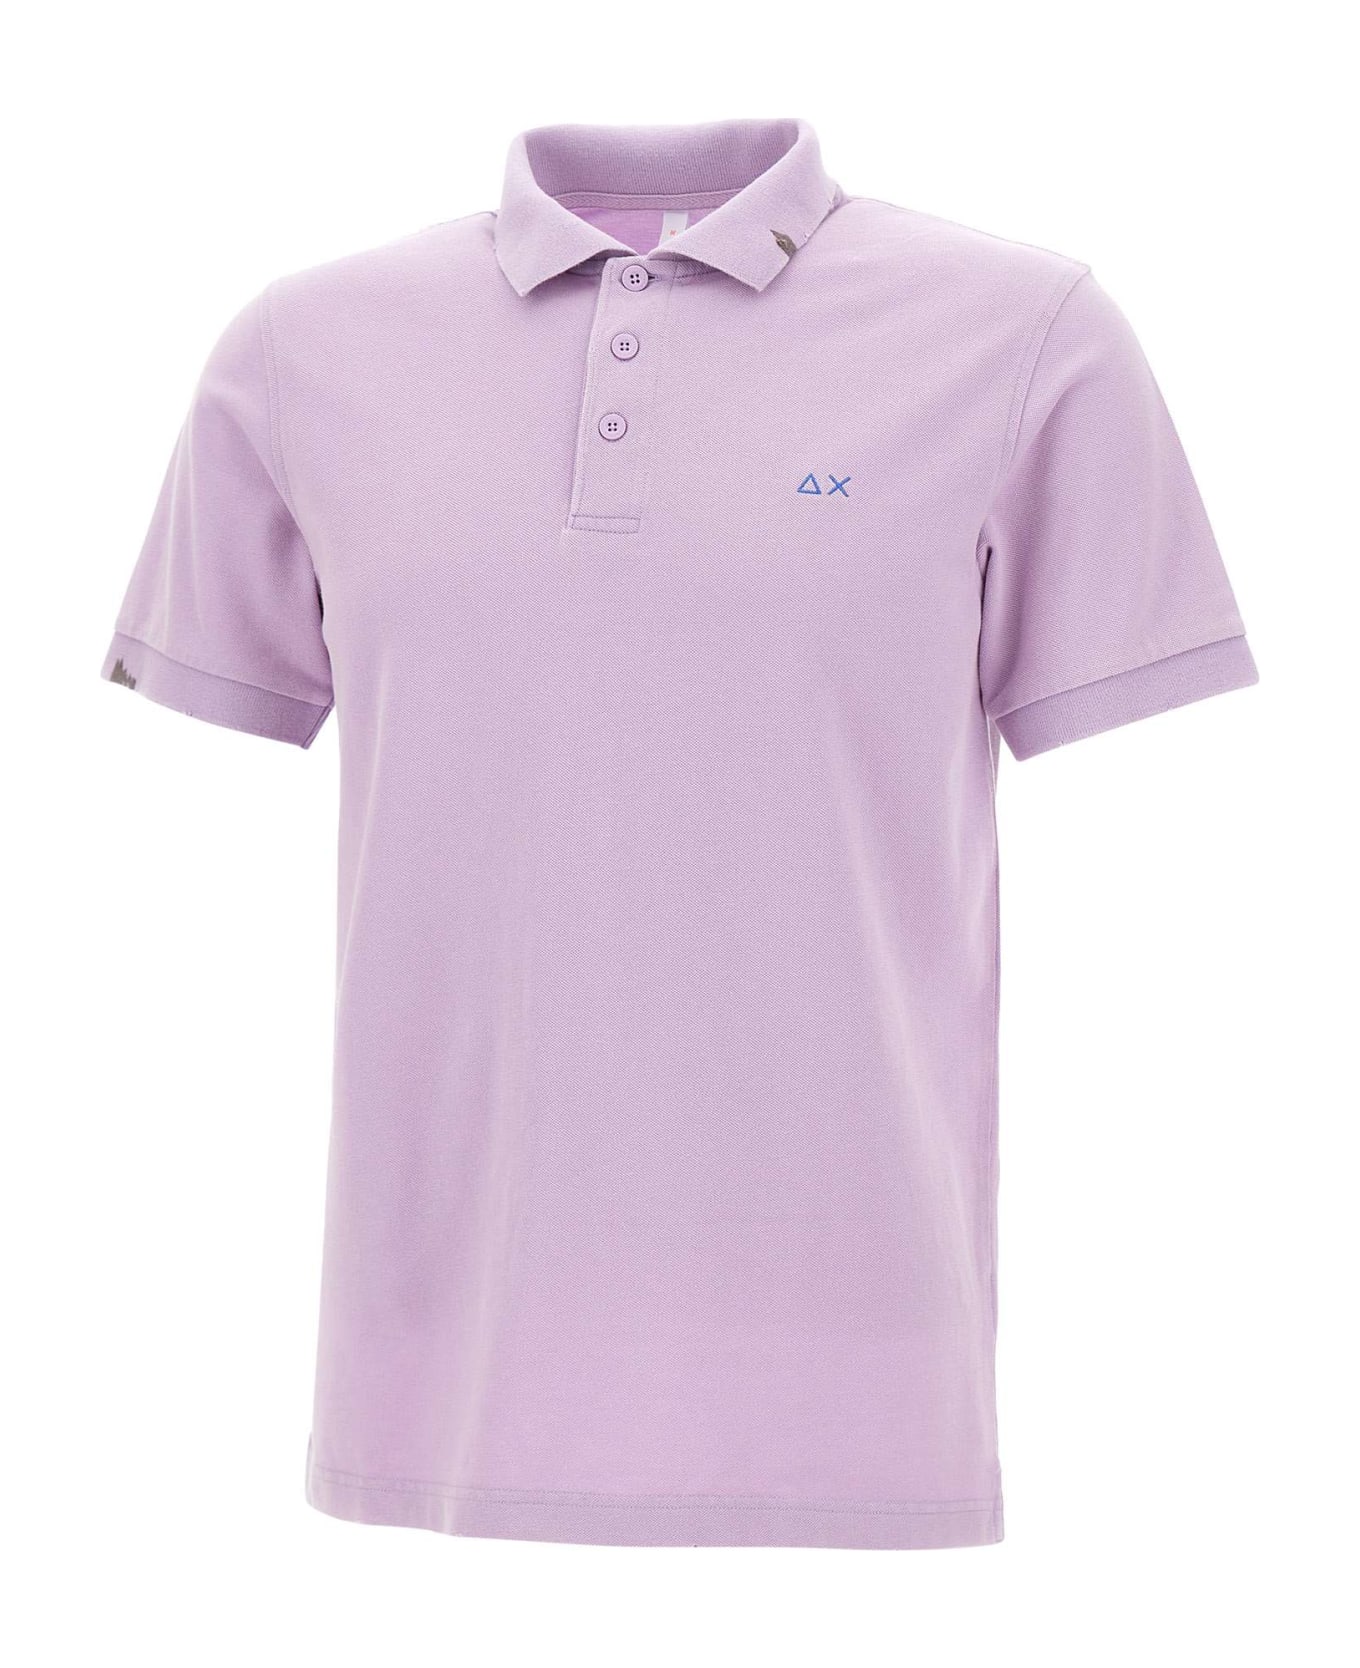 Sun 68 "solid" Polo Shirt Cotton - LILAC ポロシャツ